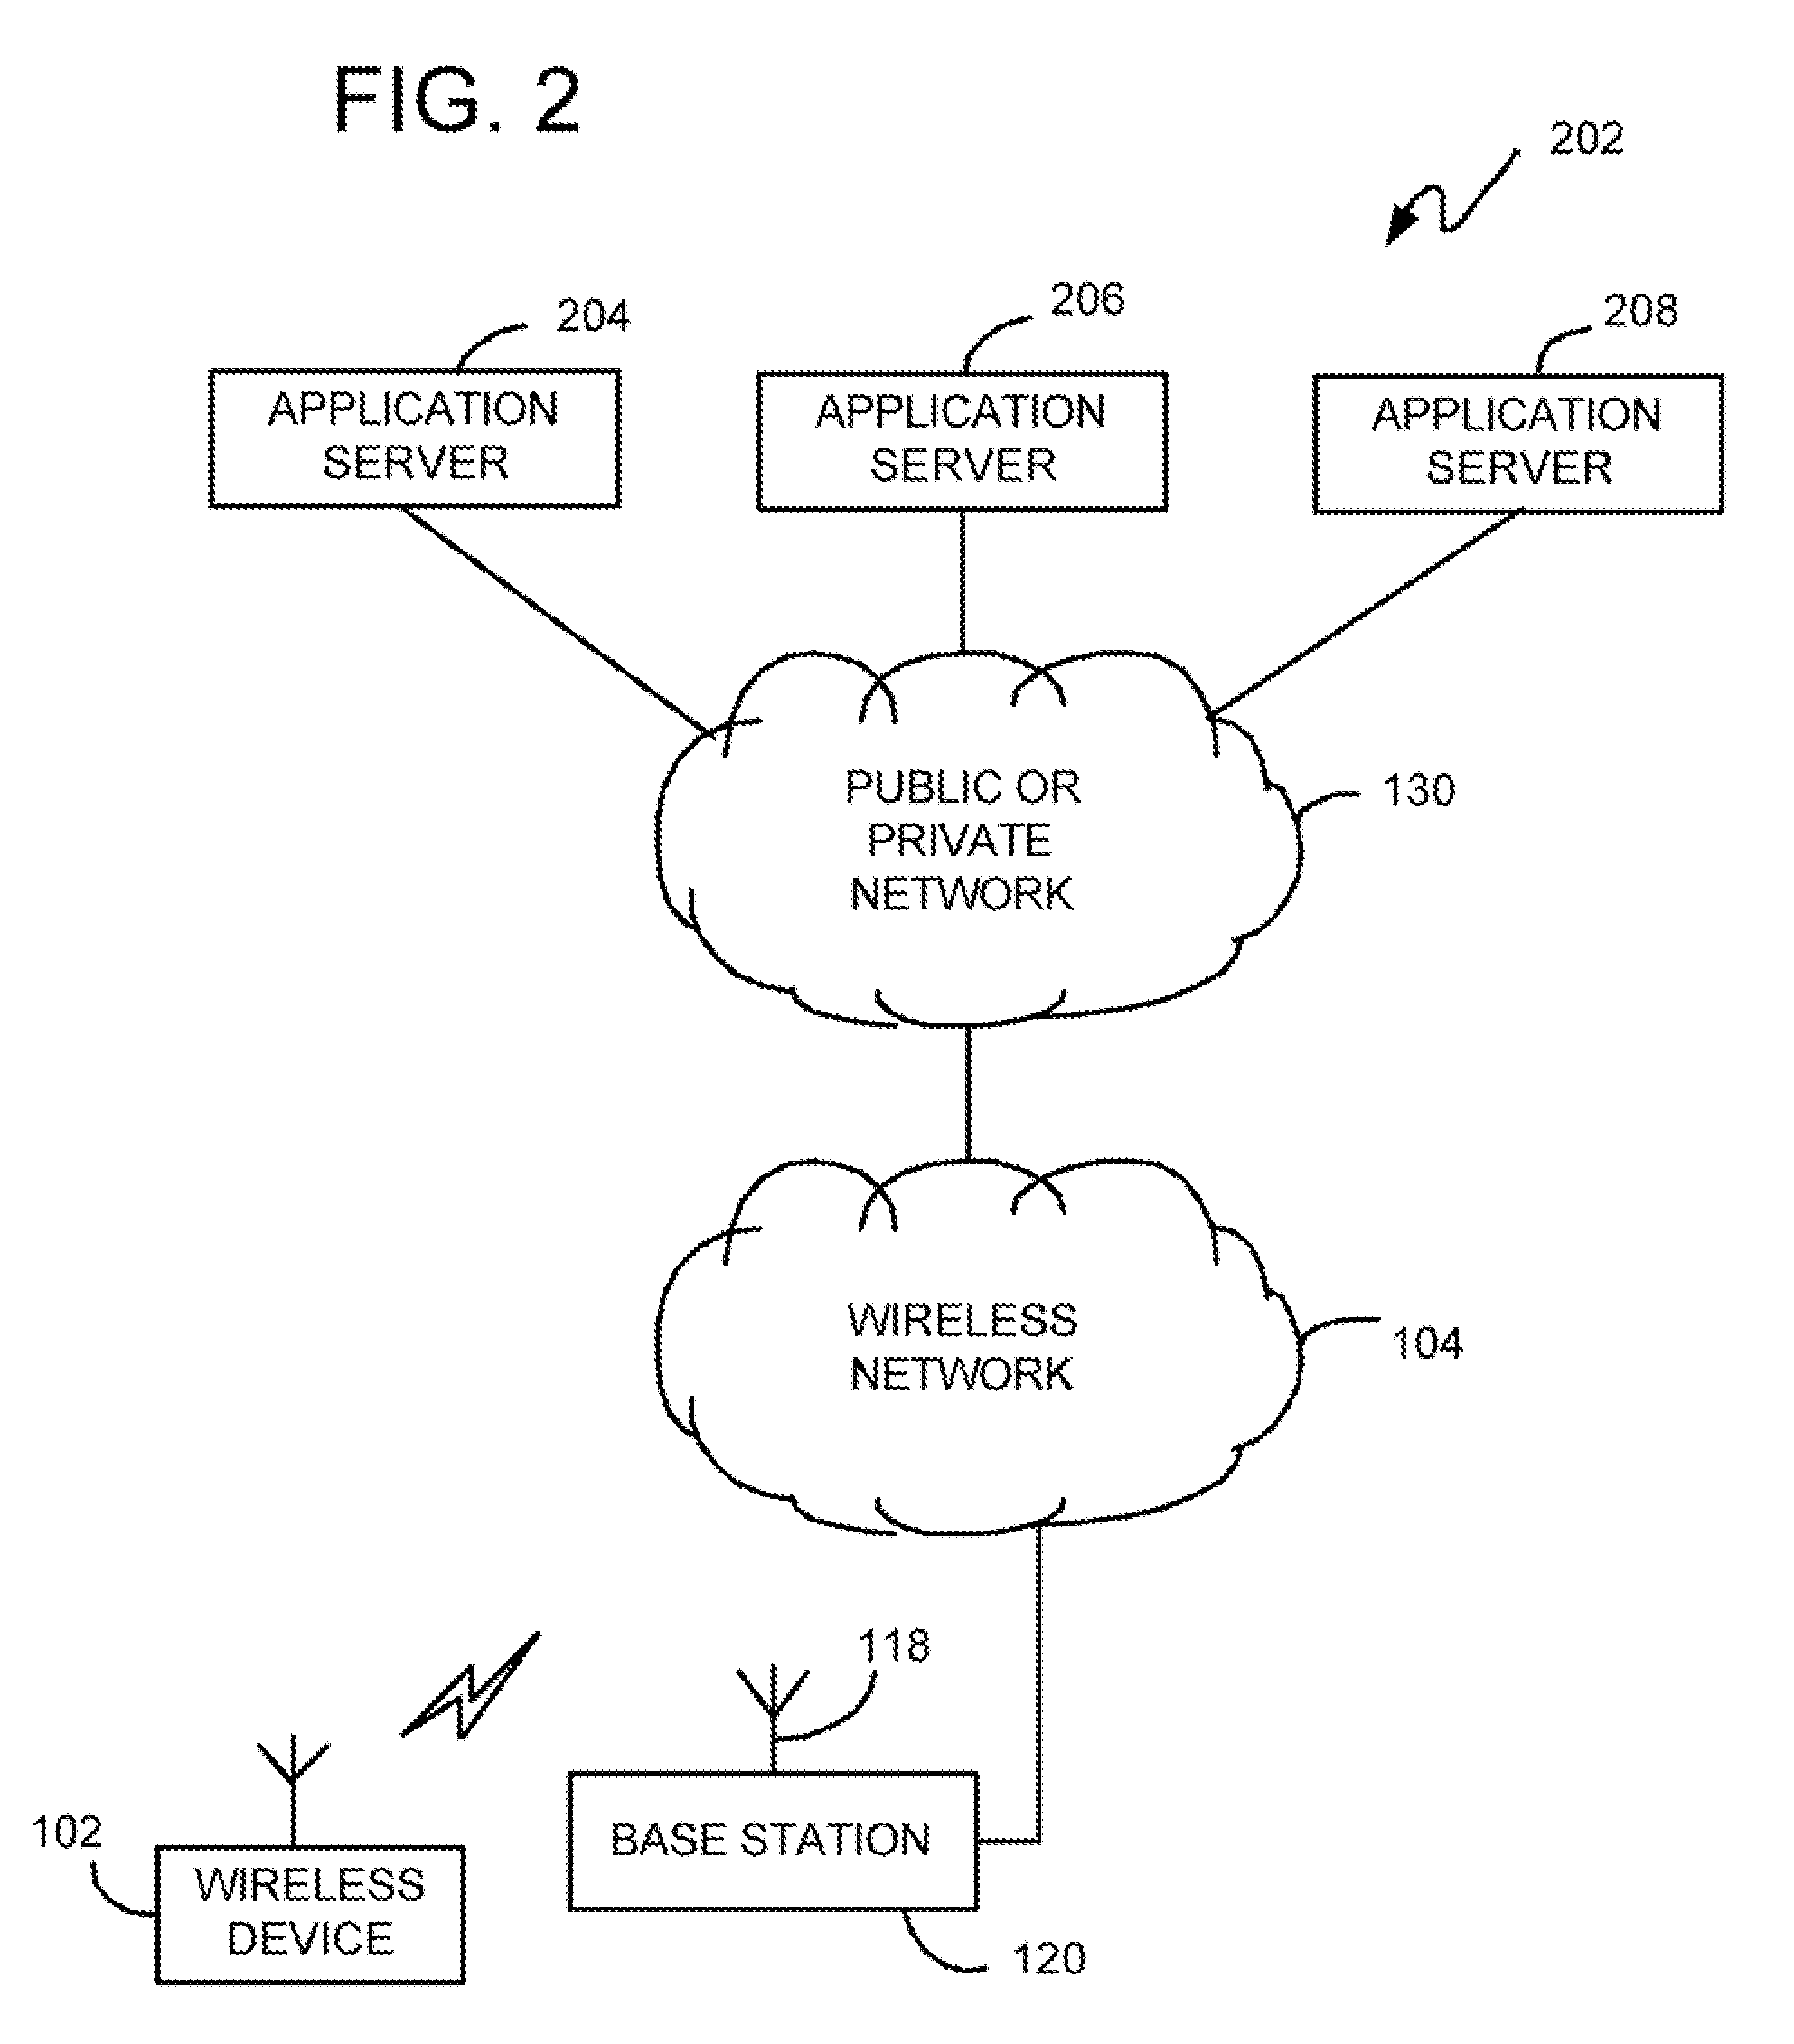 Methods And Apparatus For Re-Establishing Communication For Wireless Communication For A Wireless Communication Device After A Communication Loss In A Wireless Communication Network